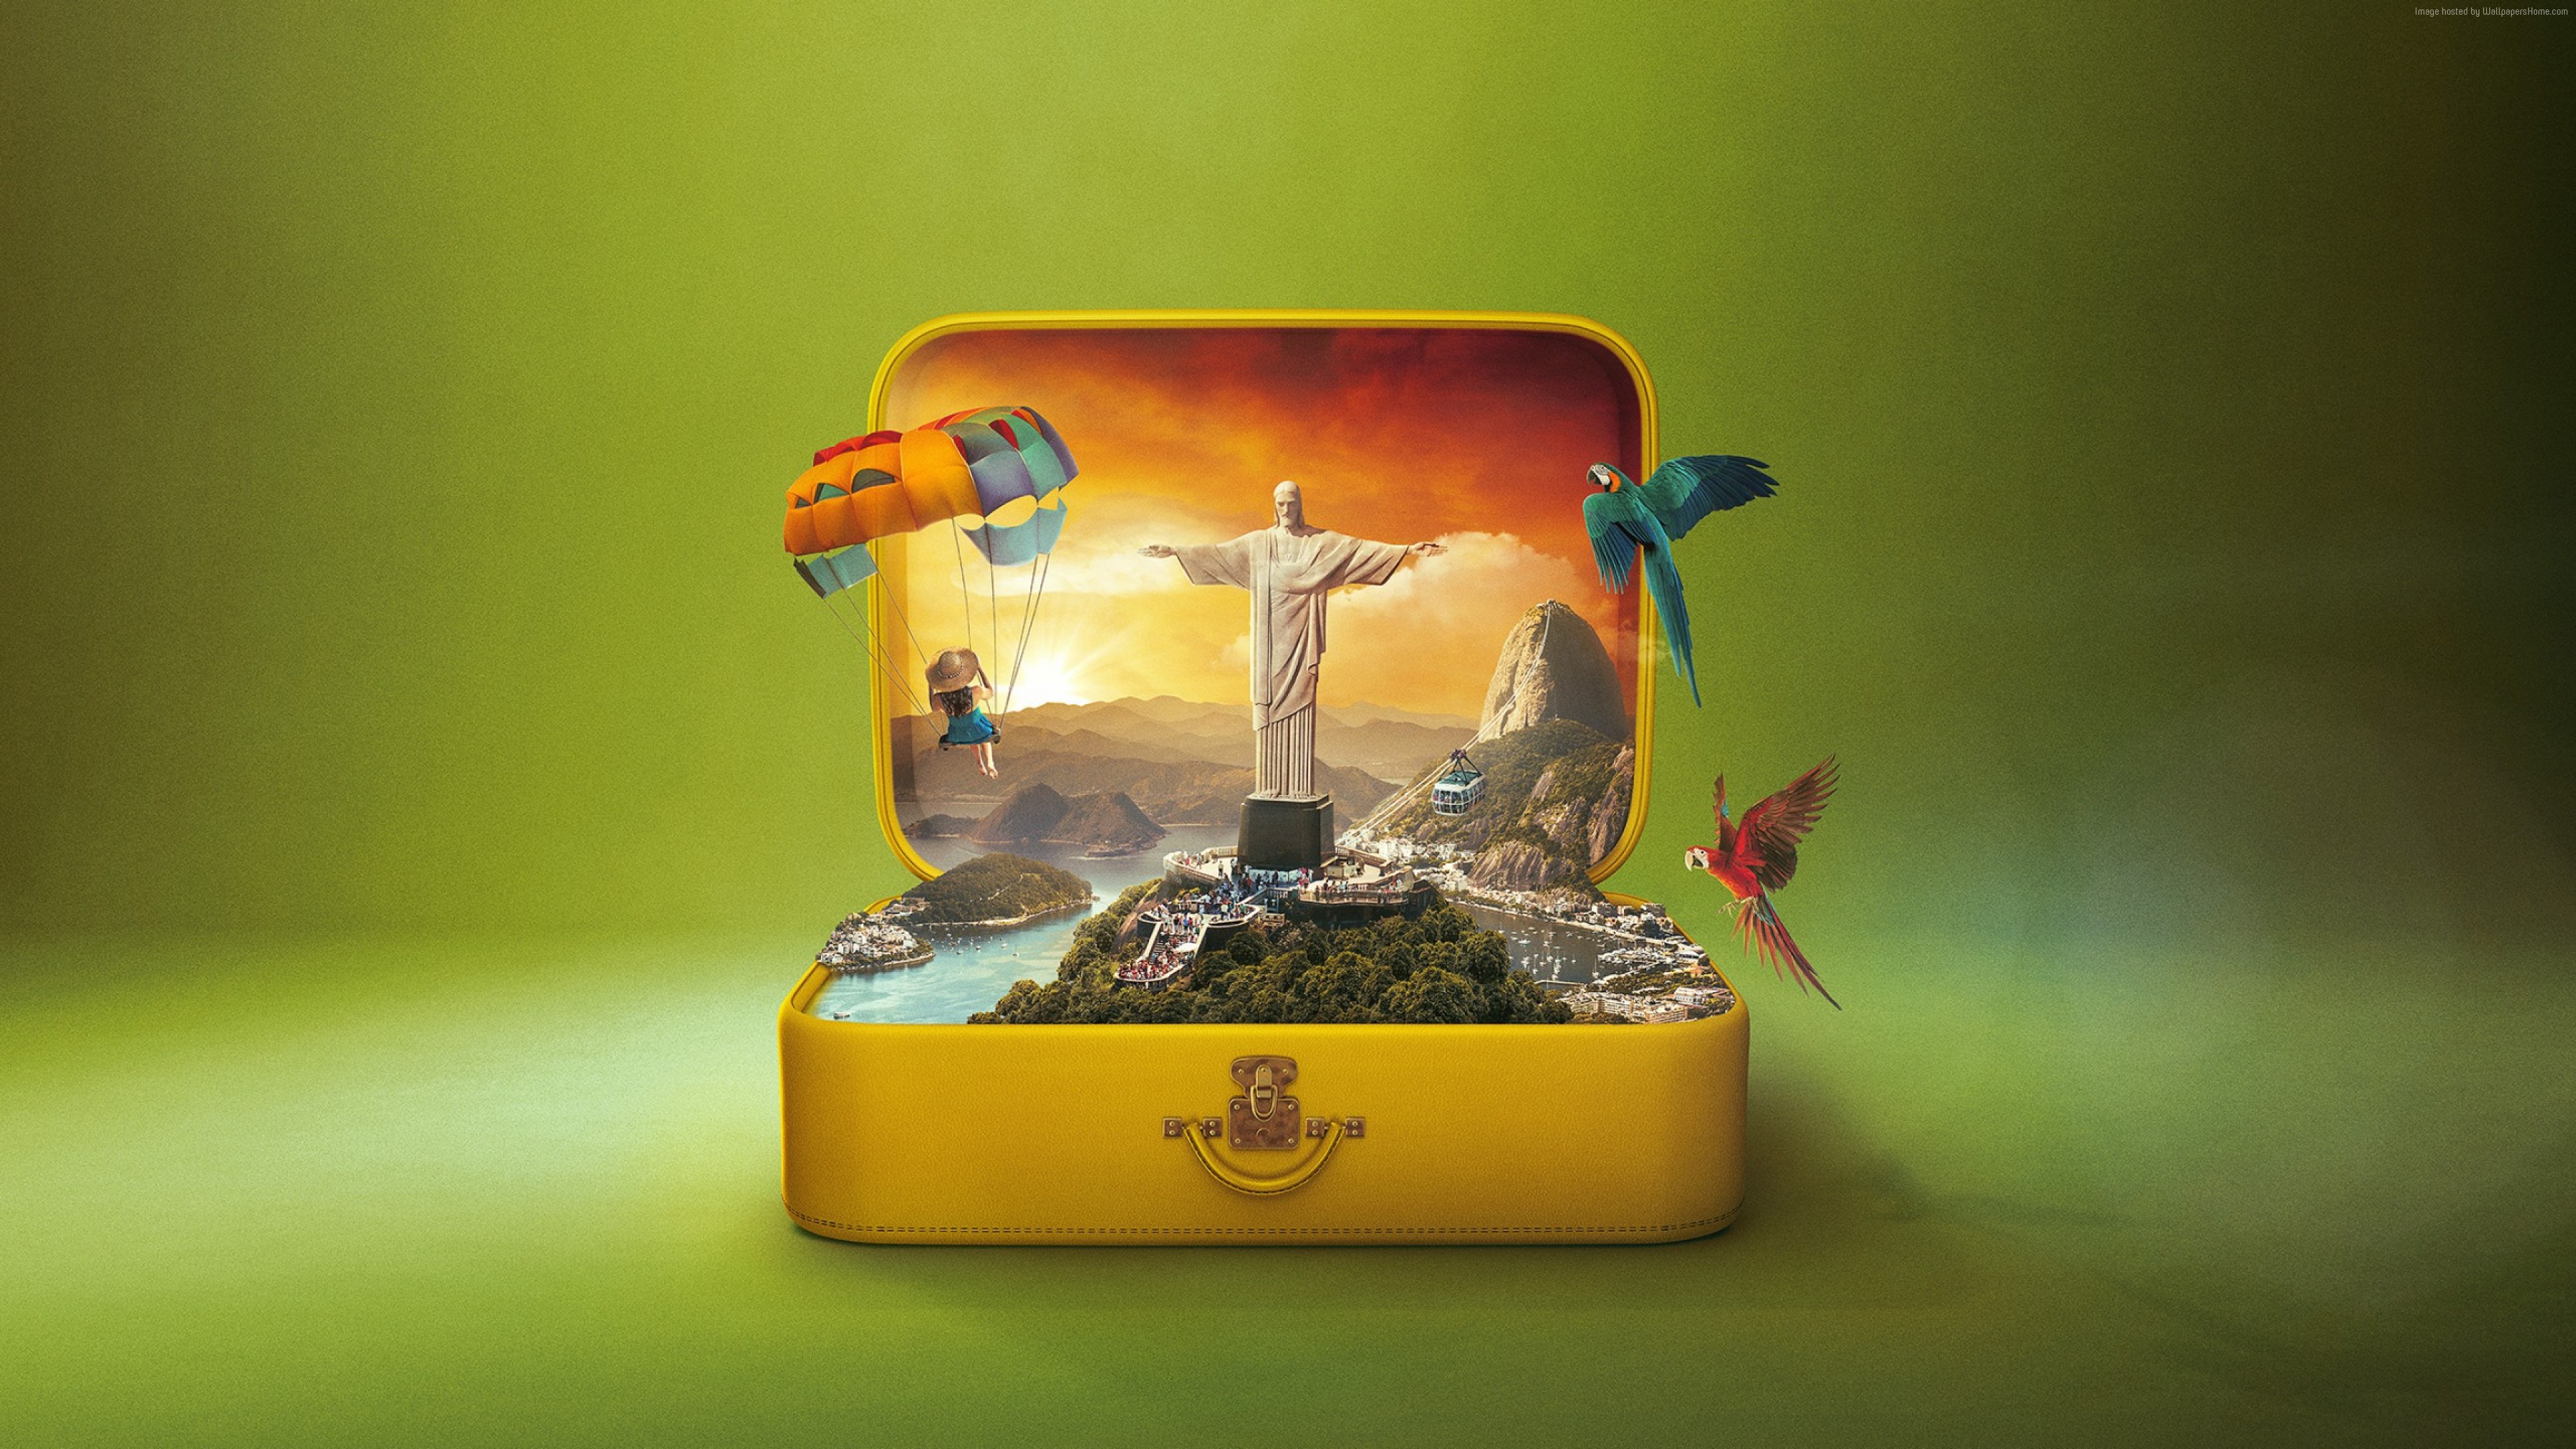 Stock Images Christ the Redeemer, Rio de Janeiro, Brazil, suitcase, HD, Stock Images